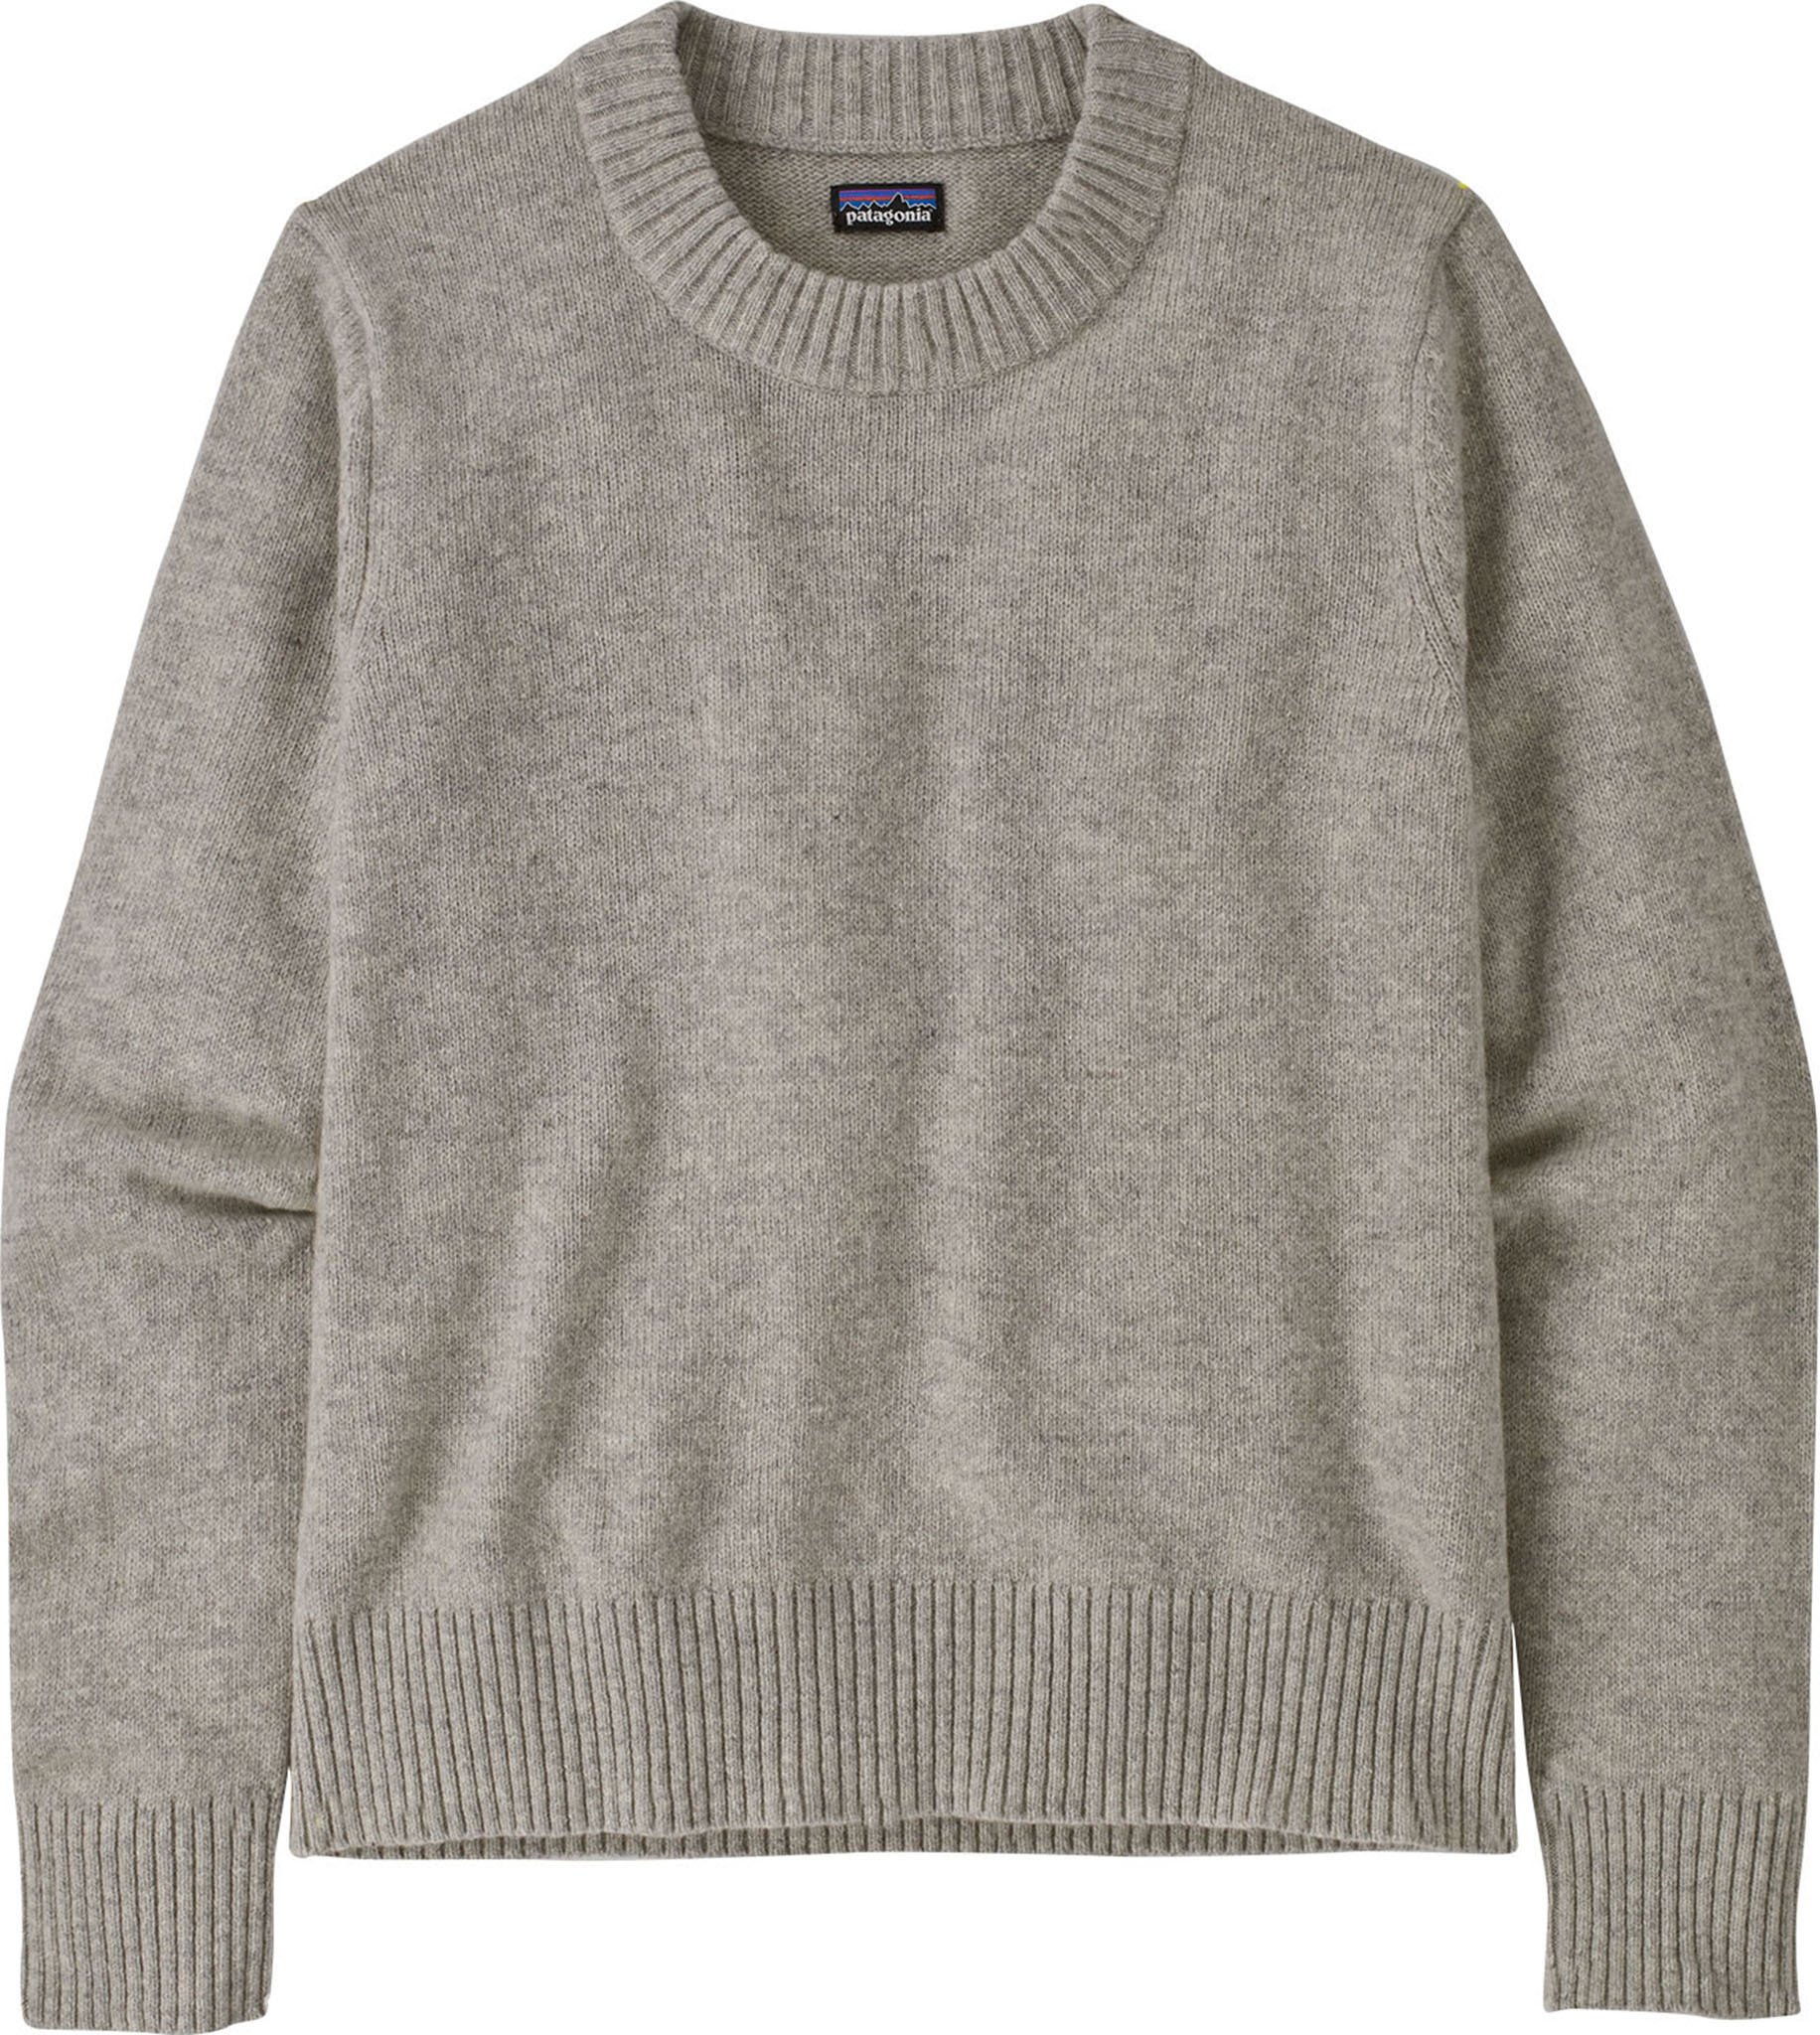 Patagonia Recycled Wool Crew Neck Sweater - Women's | The Last Hunt